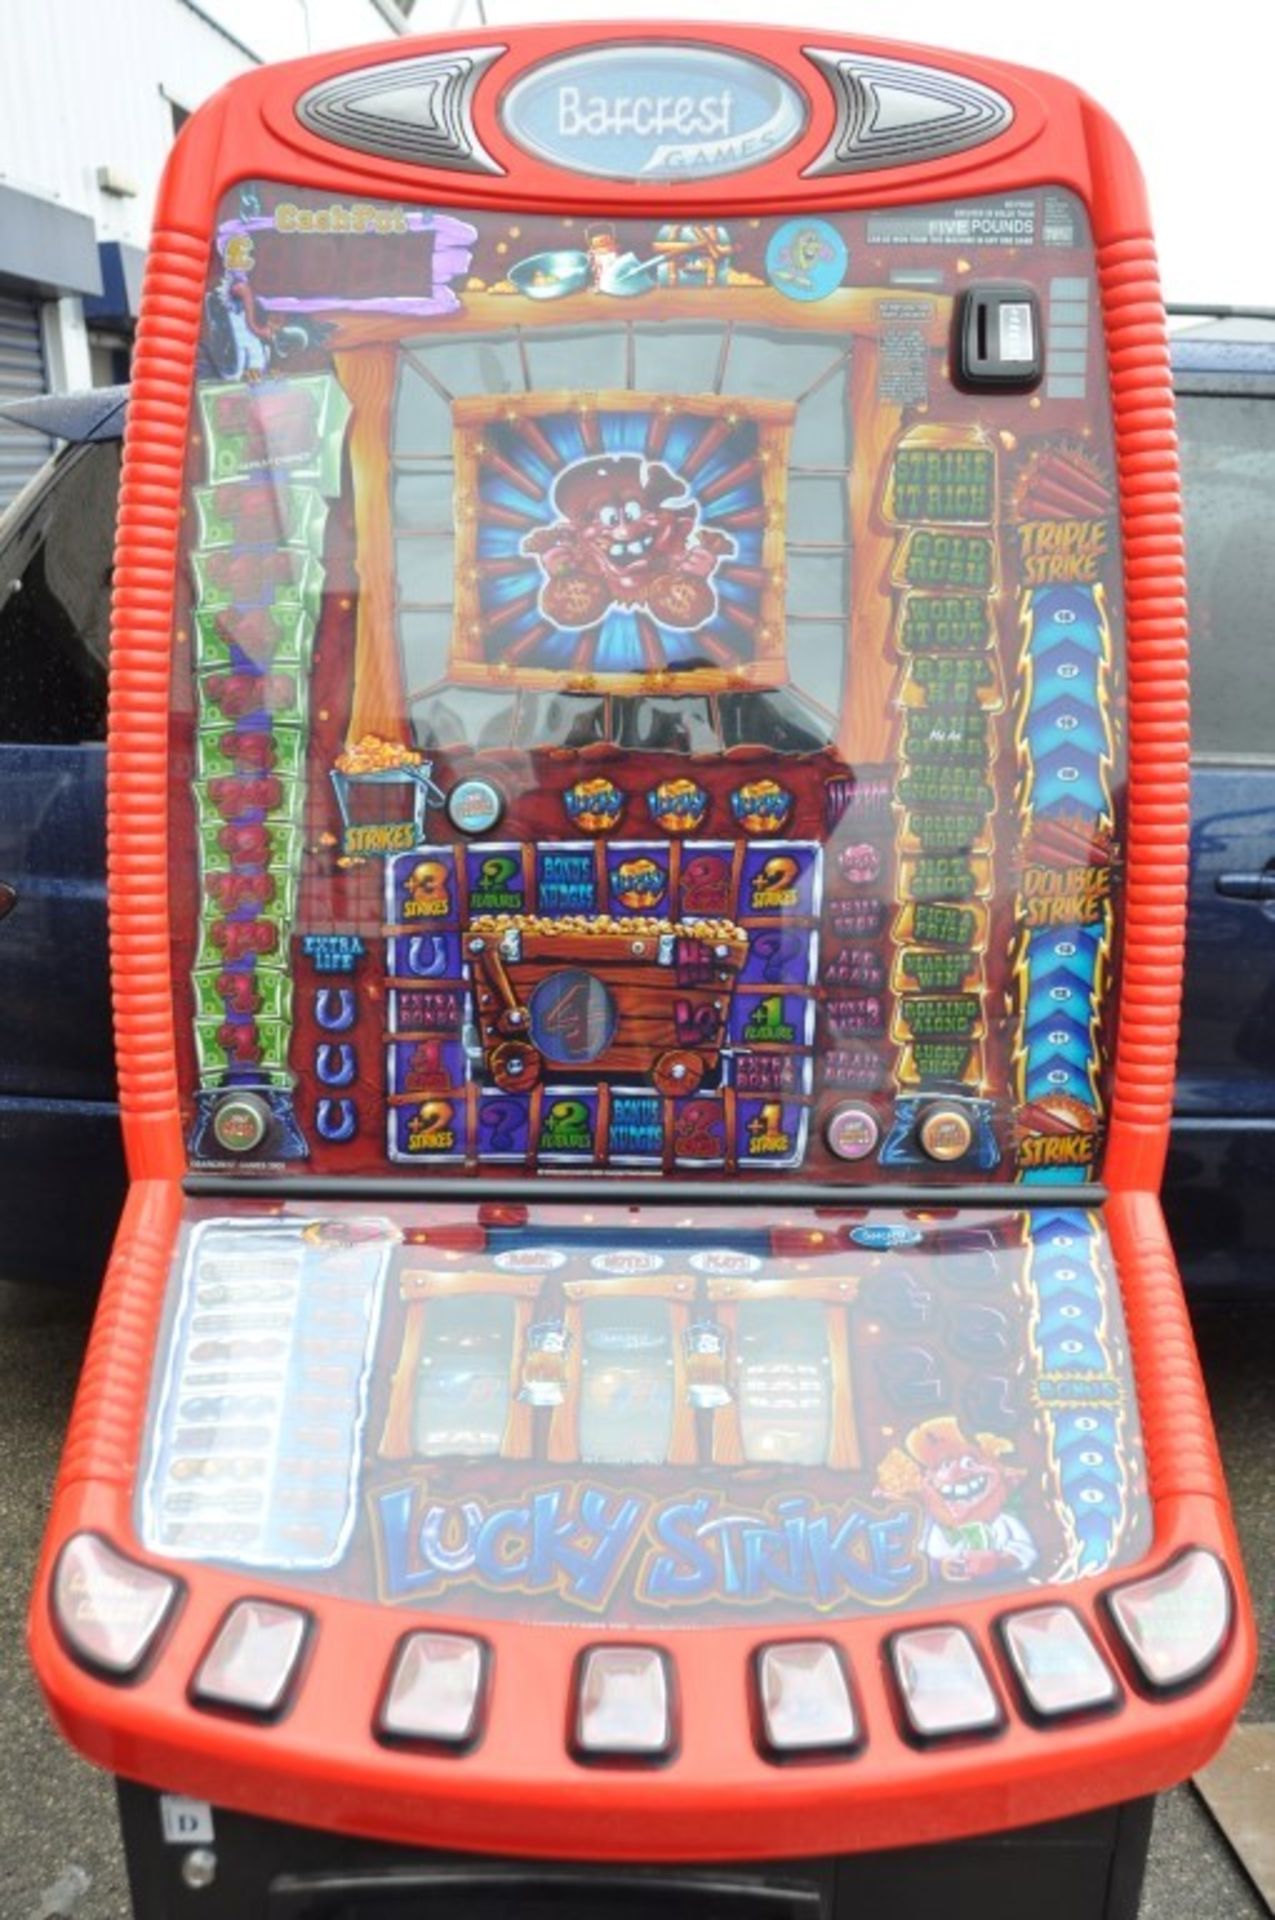 1 x "LUCKY STRIKE" Arcade Fruit Machine - Manufacturer: Barcrest (2005) - Pre-Owned In Good - Image 4 of 14